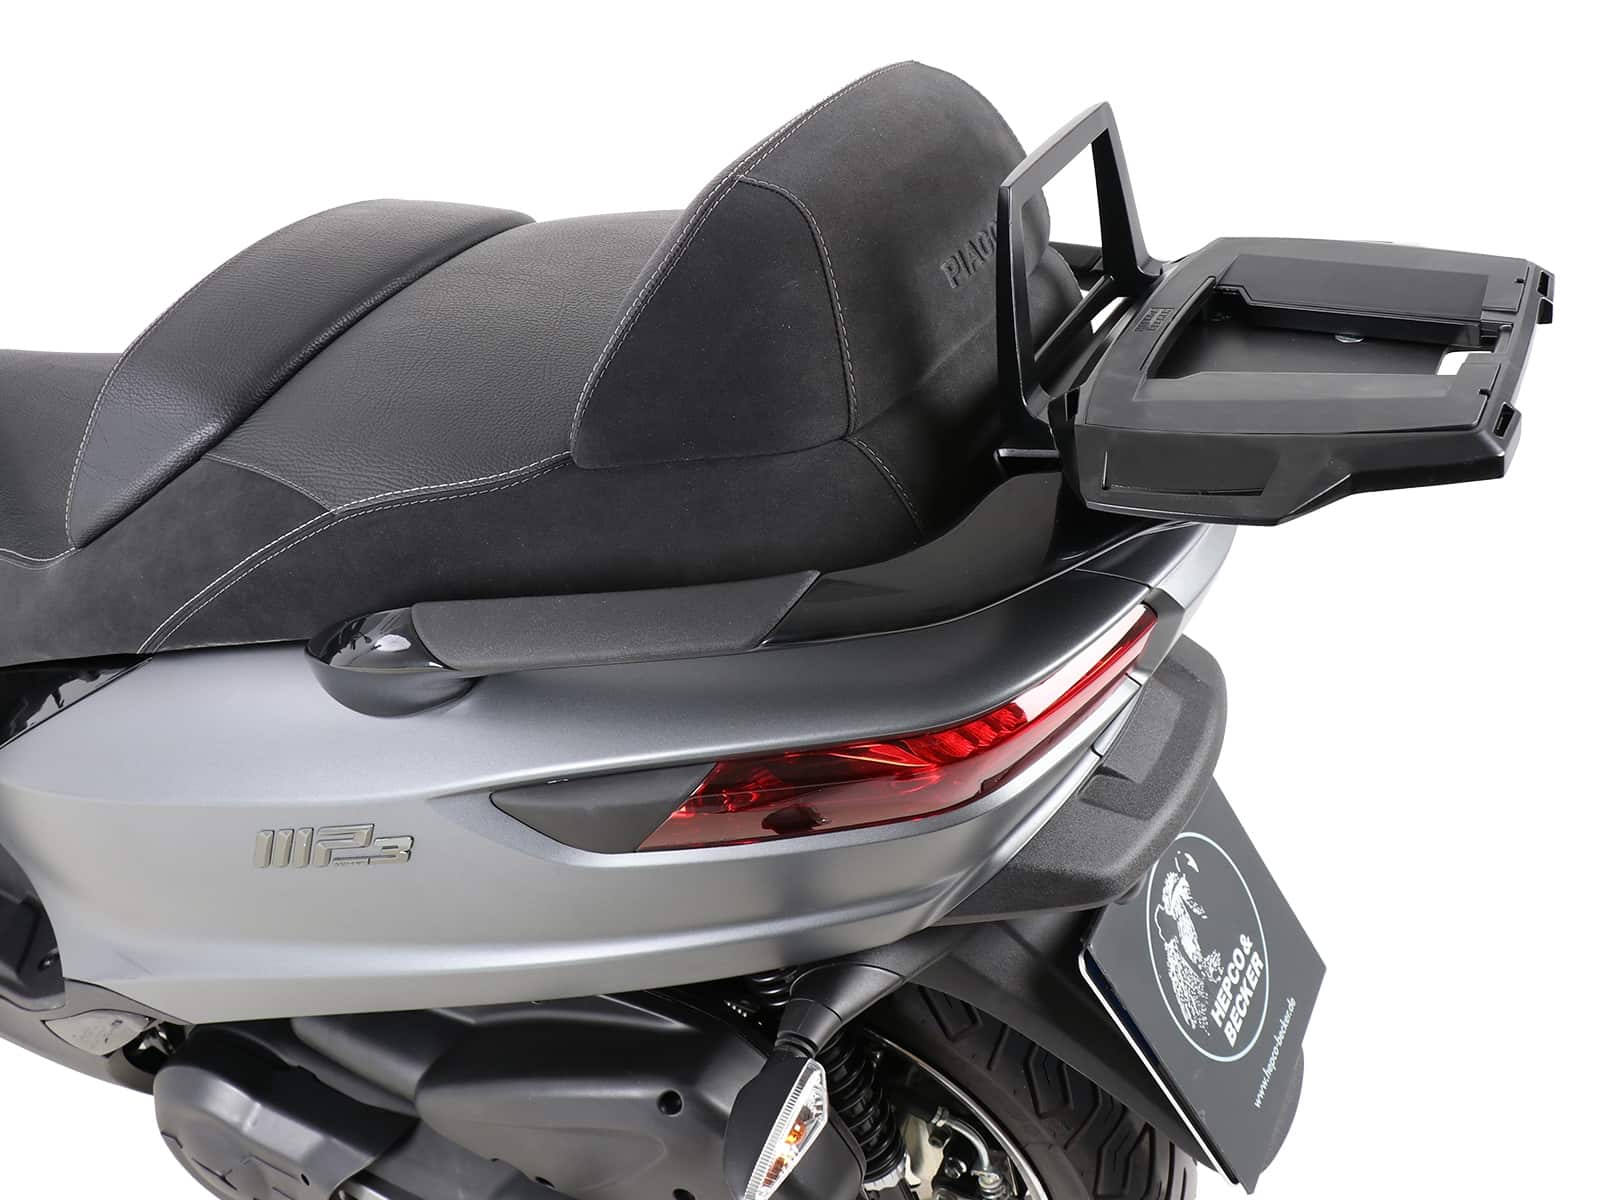 Alurack top case carrier black for combination with original rear rack for Piaggio MP3 350 (2018-2022)